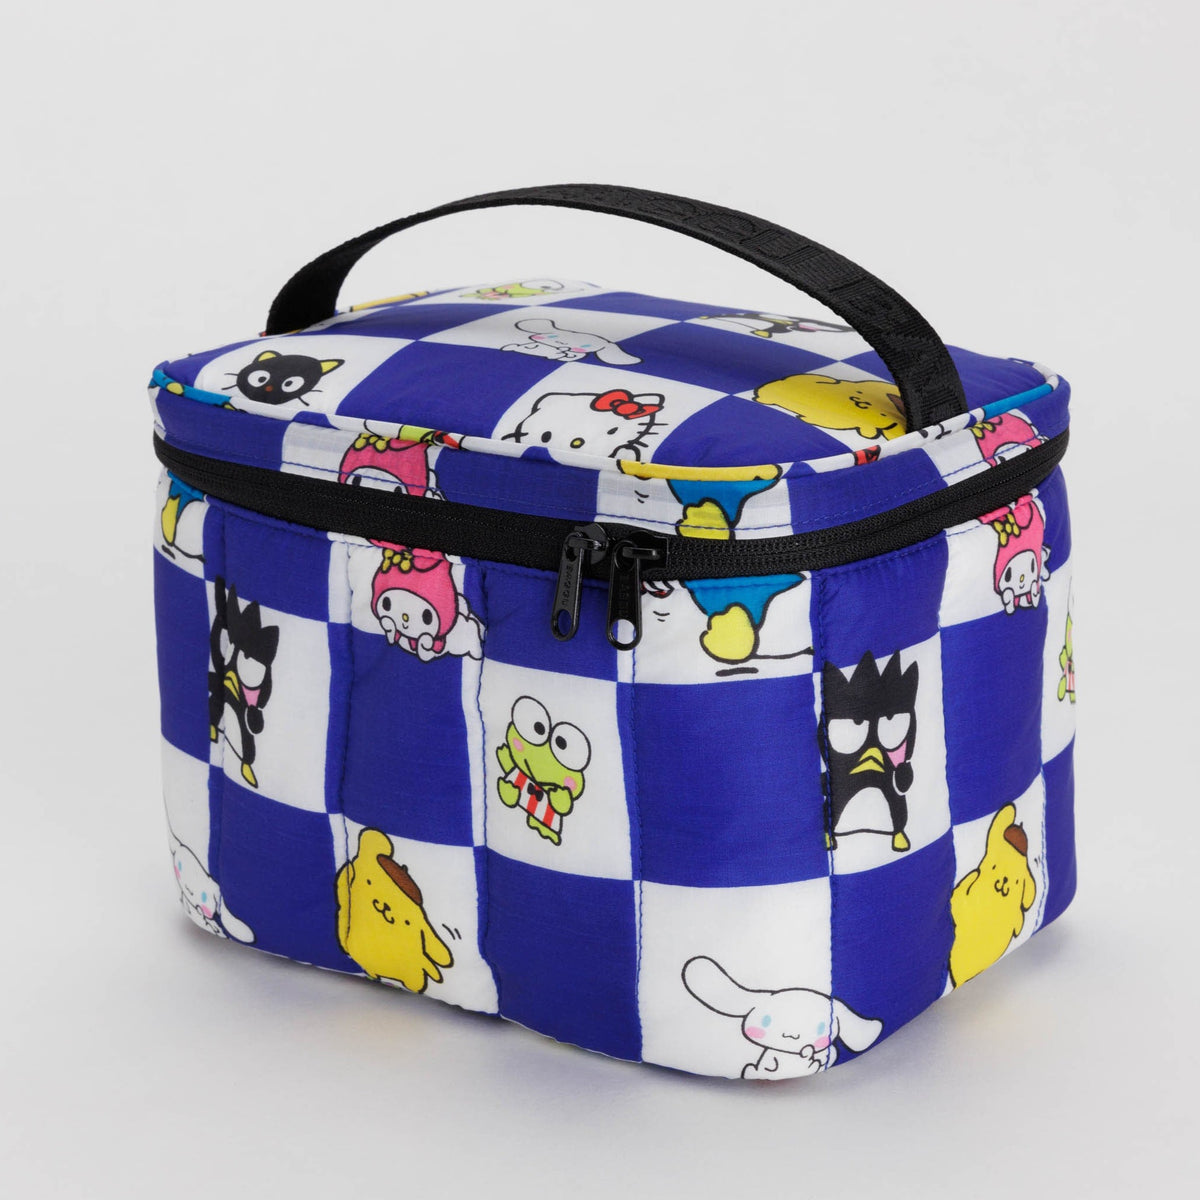 Lunch Bags Kids by Snack Attack Insulated Lunch Boxes Bag Girls